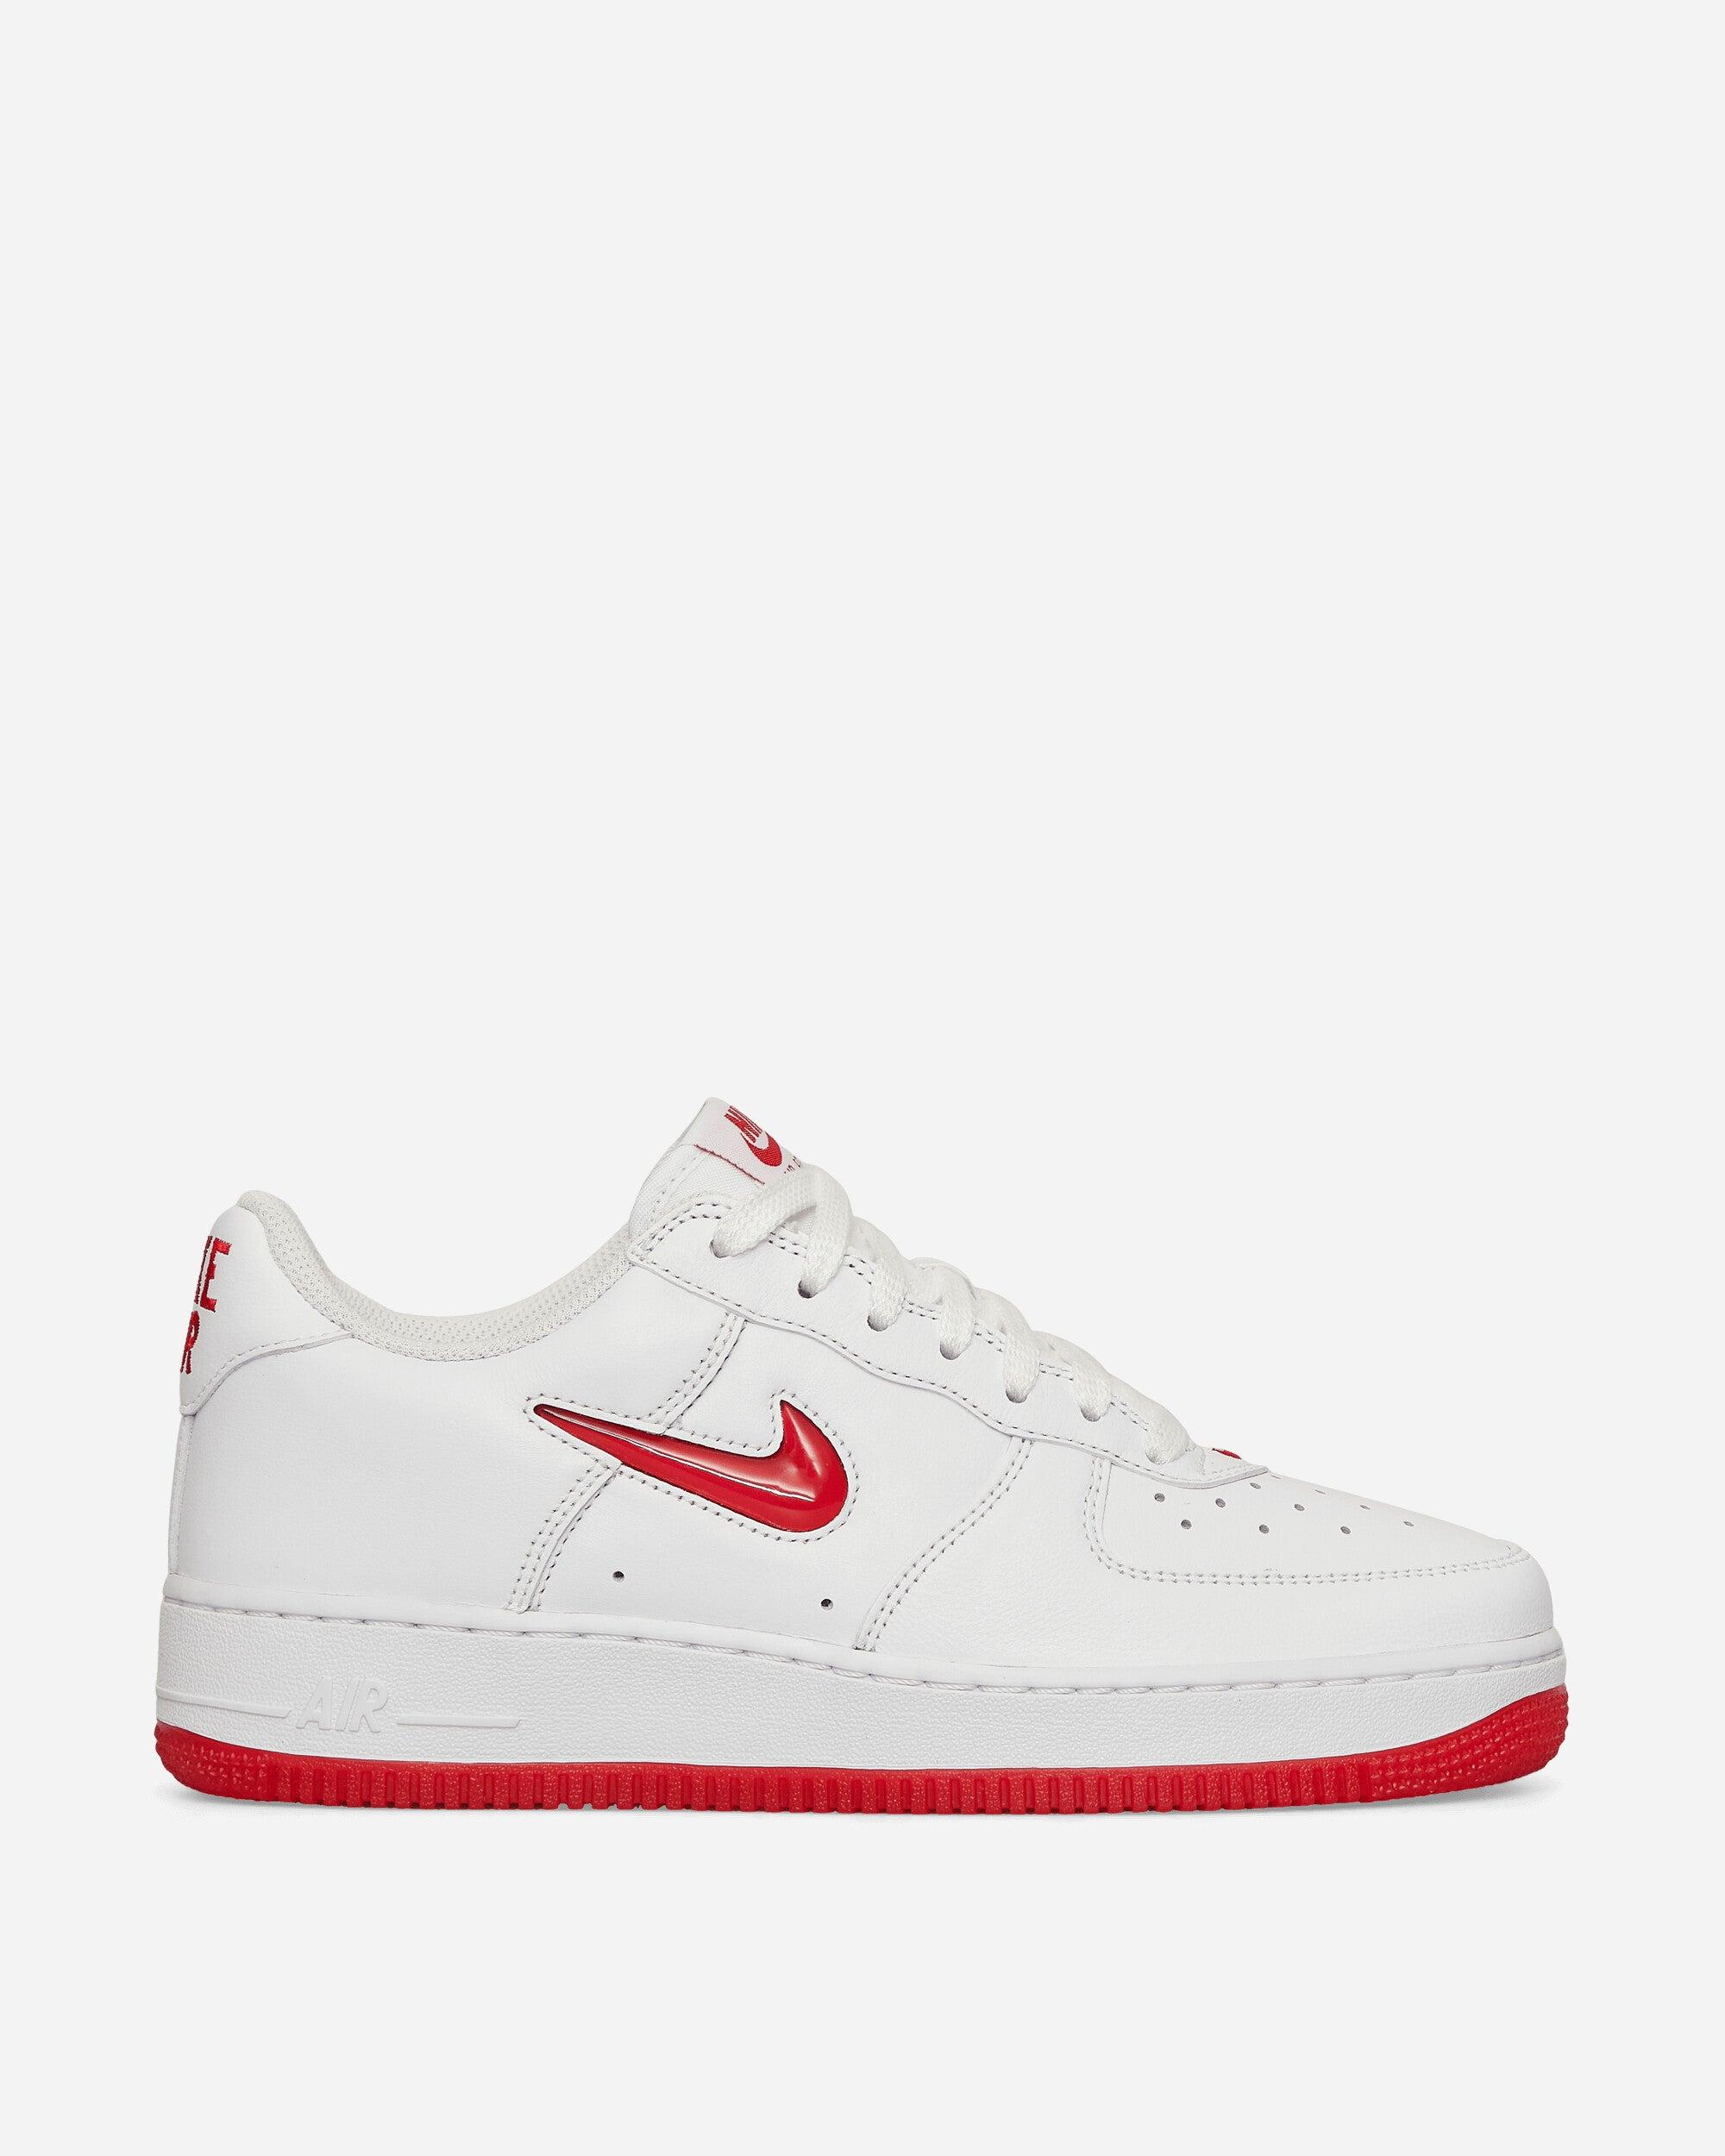 Nike Air Force 1 Low 07 LV8 White Red